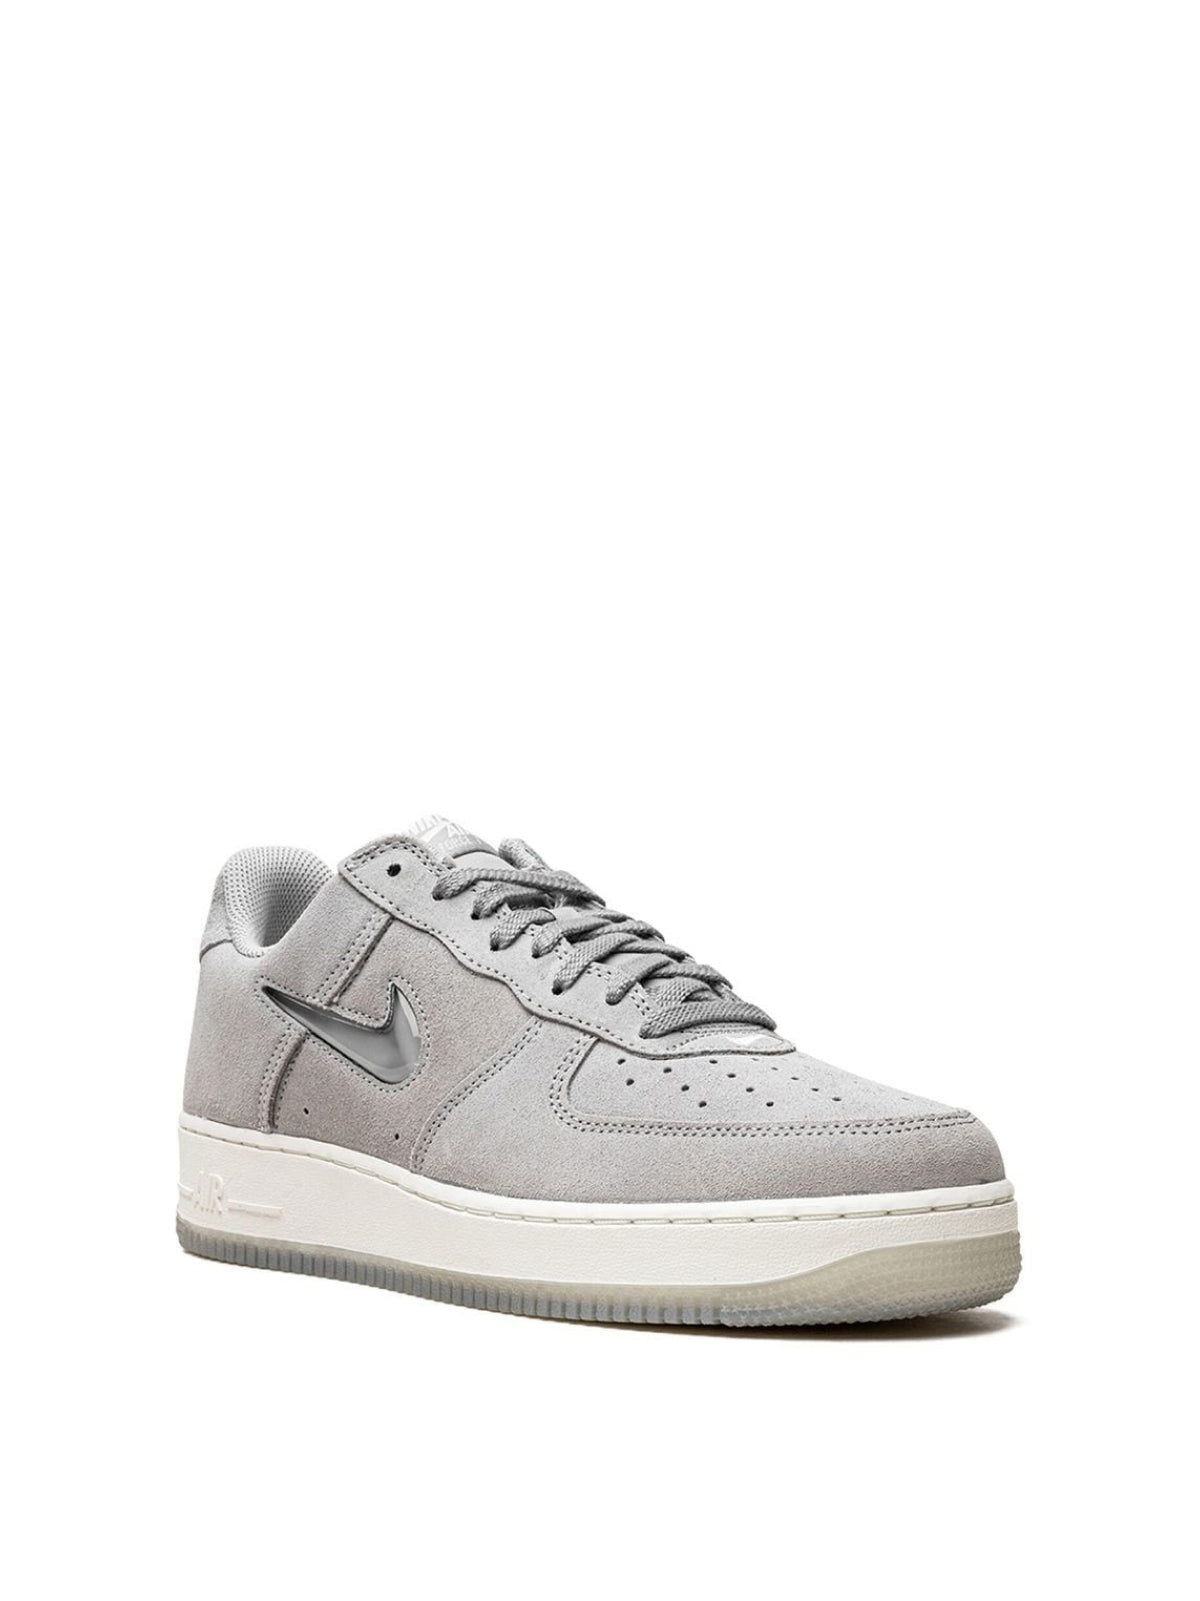 Nike-OUTLET-SALE-Air Force 1 Low Retro Sneakers-ARCHIVIST